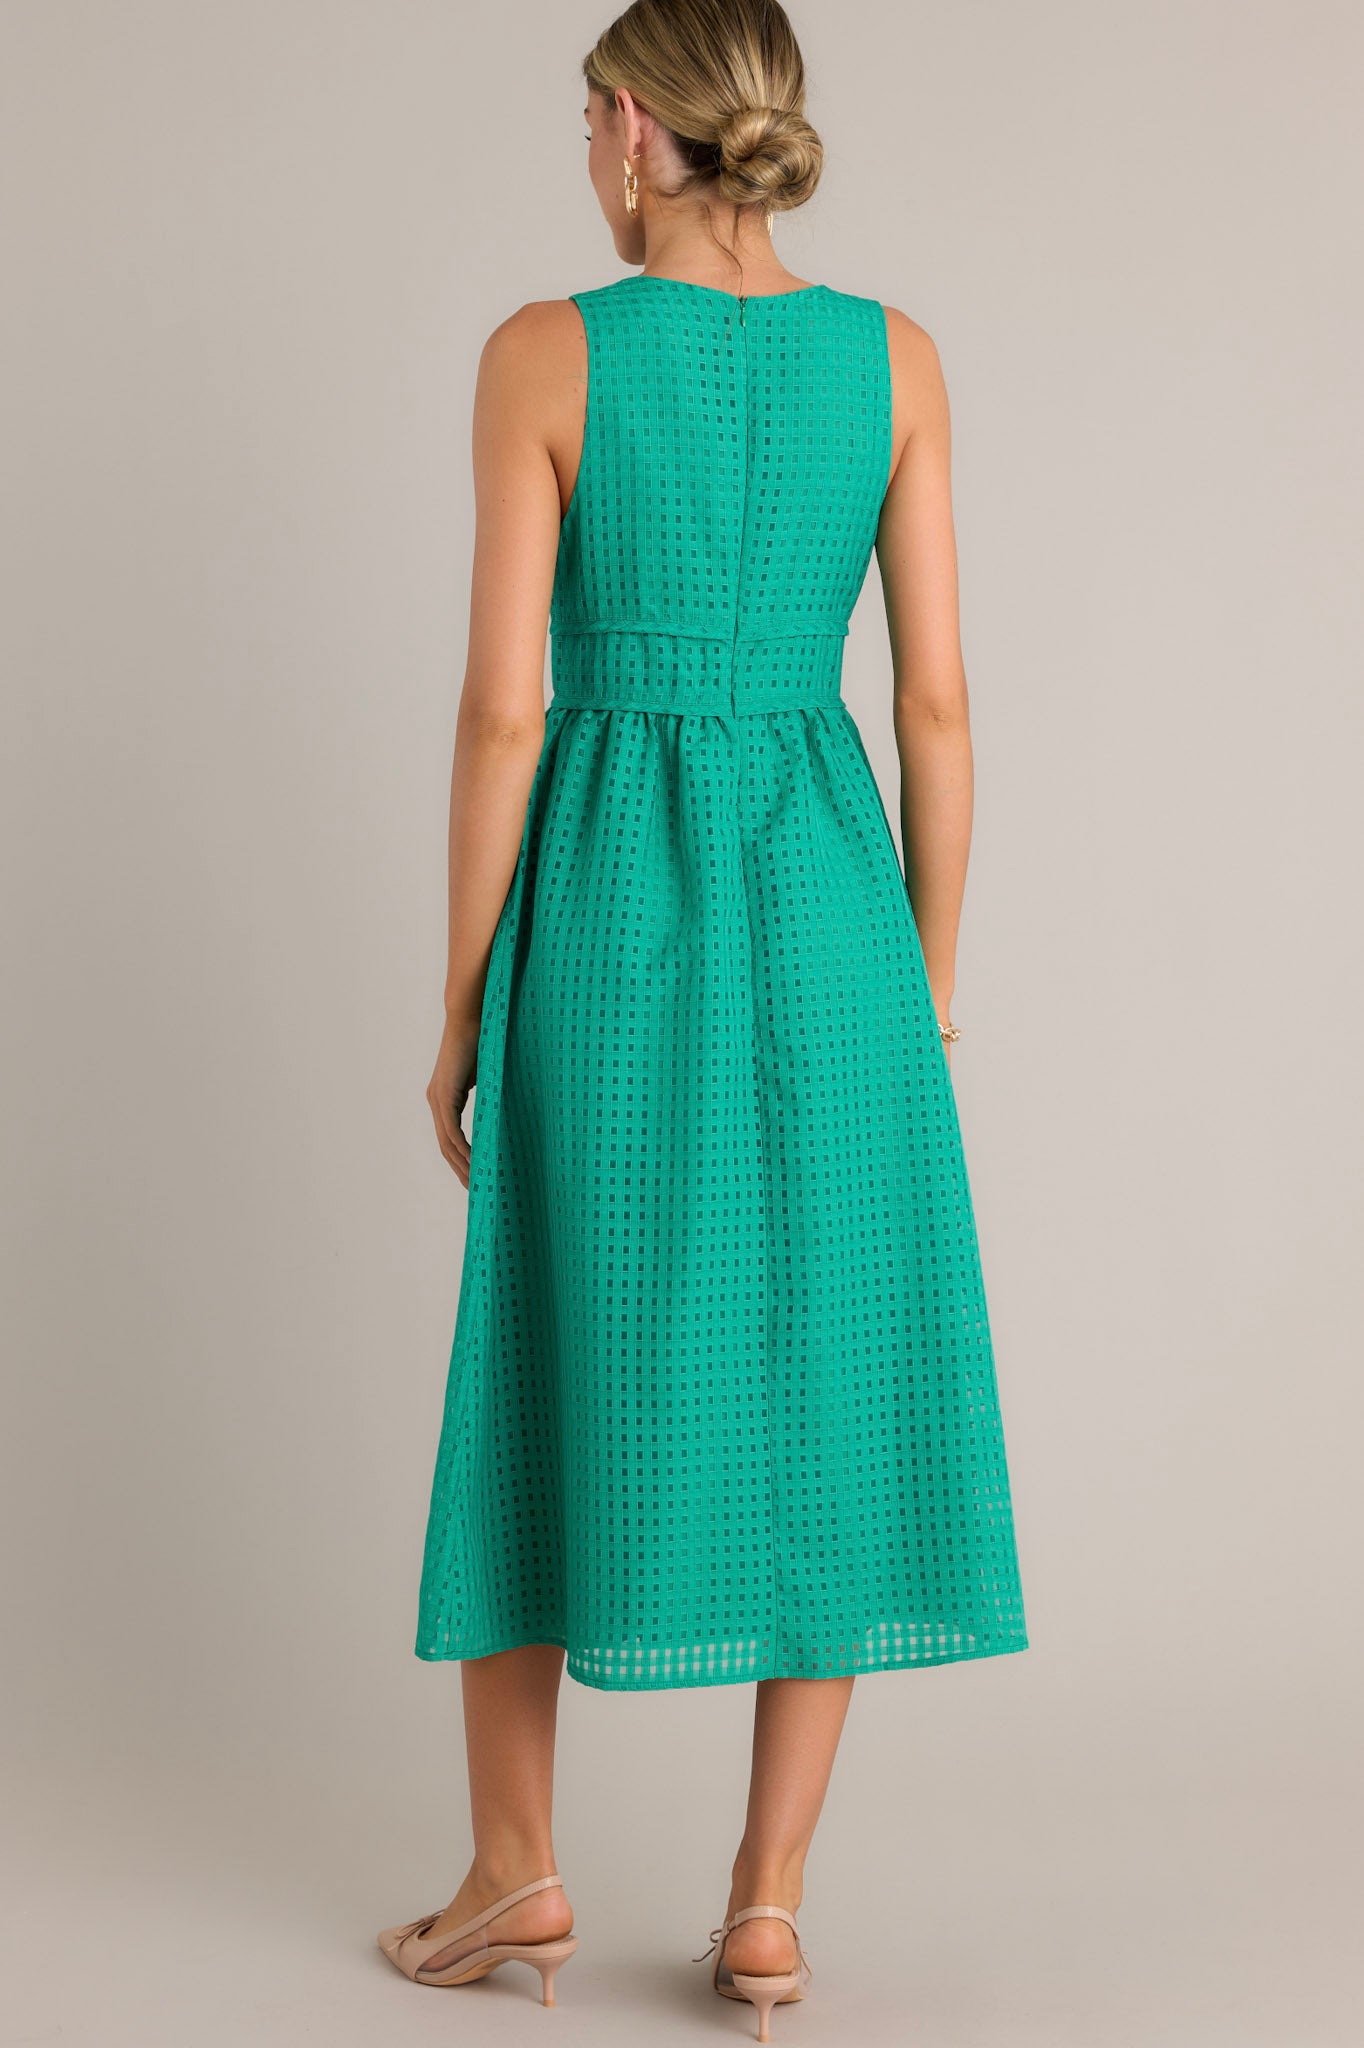 Back view of a green midi dress highlighting the discrete back zipper, thick waistband, and overall fit.